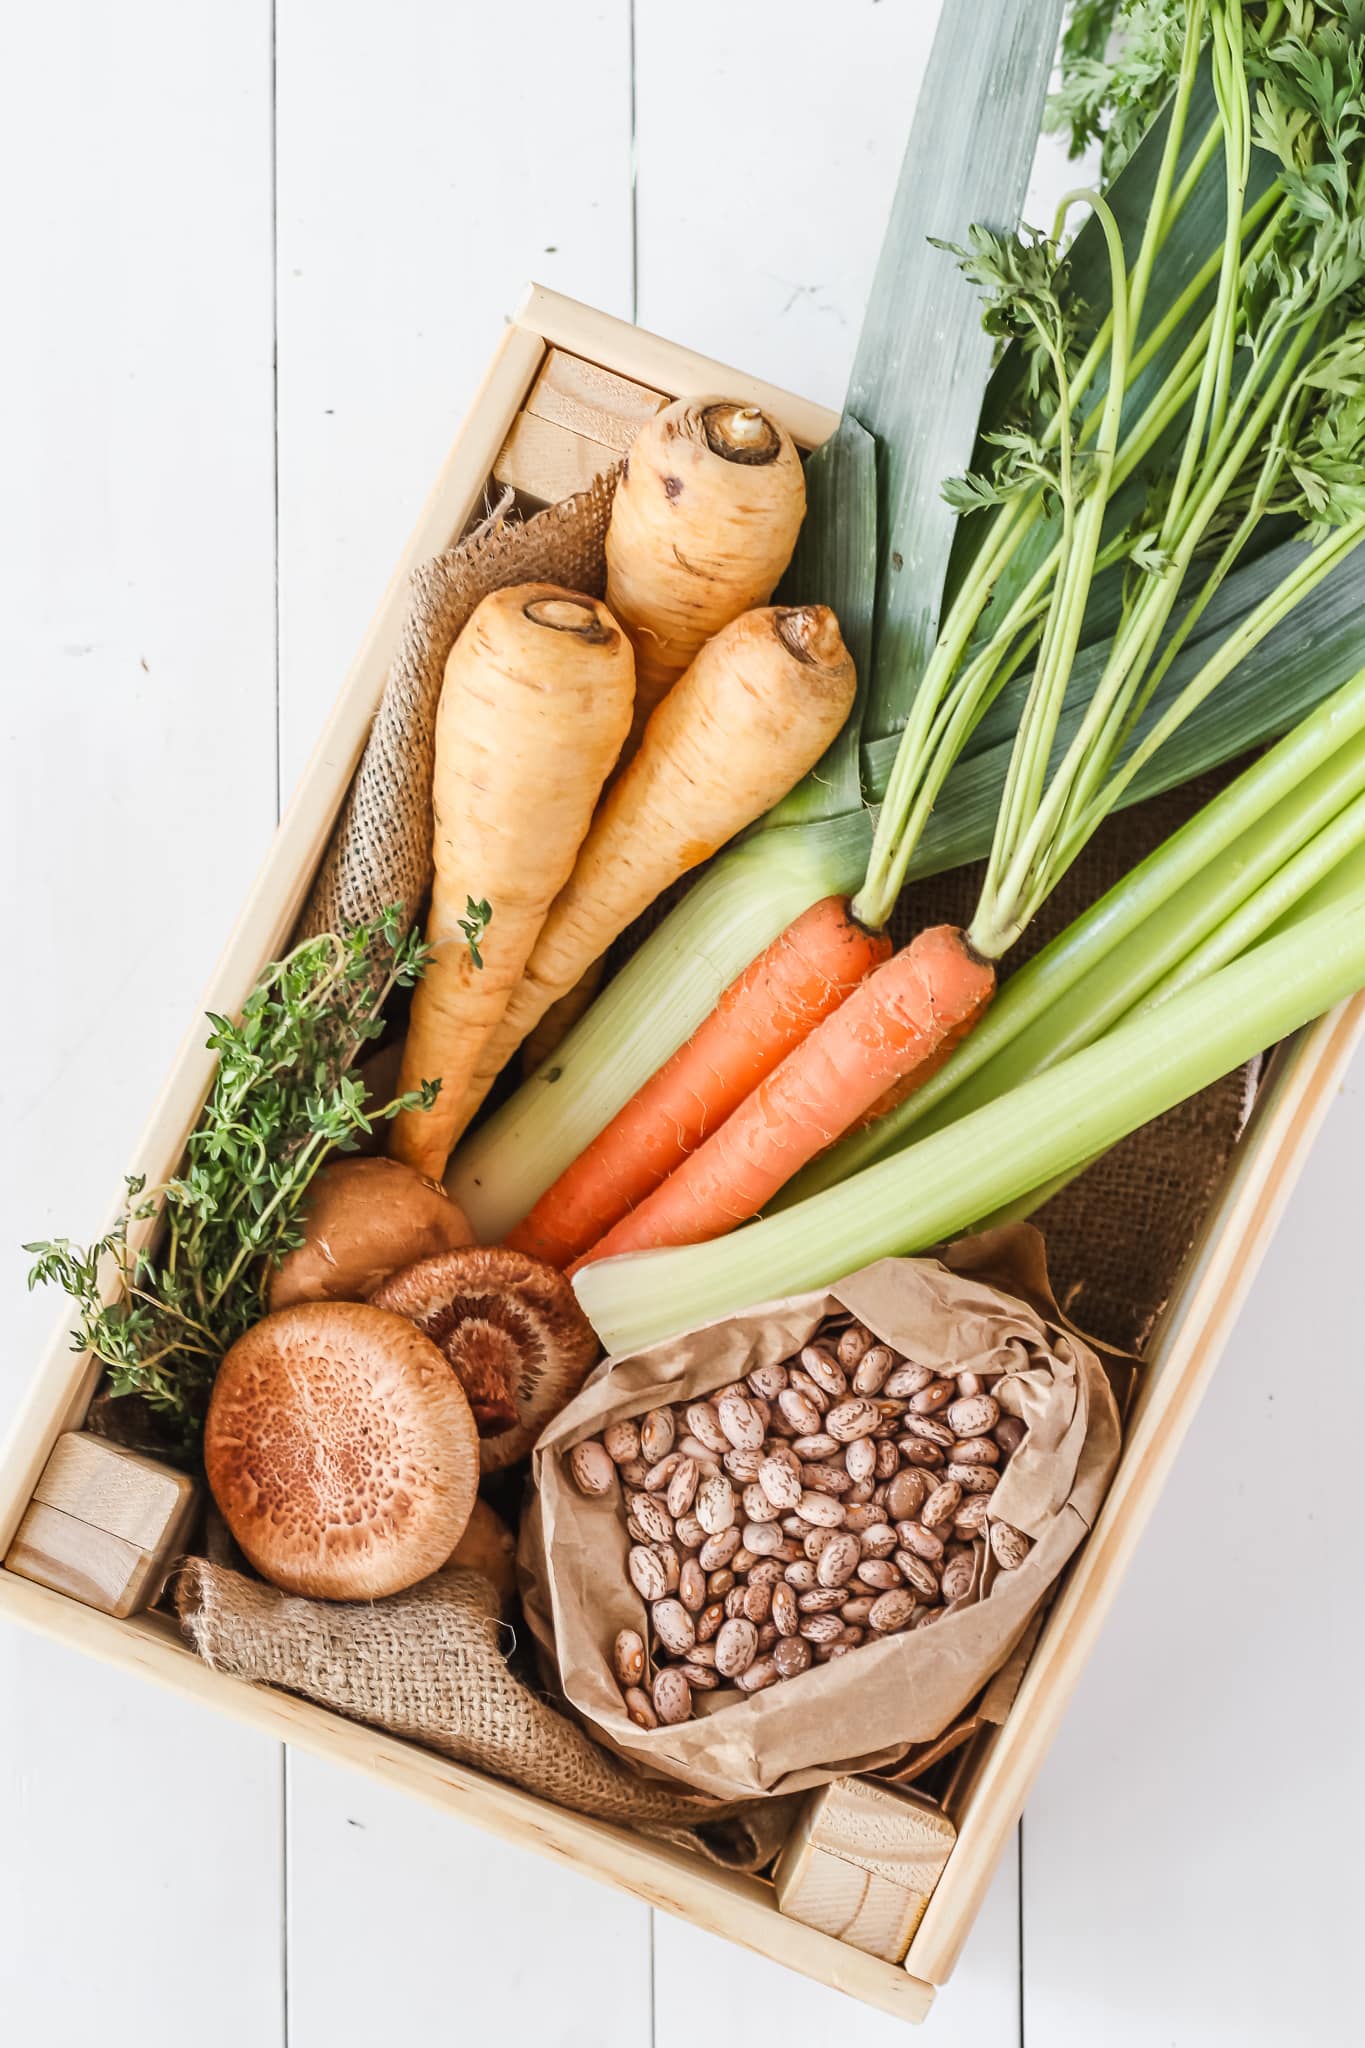 parsnips, carrots, leeks, beans, mushrooms and fresh thyme in a carton